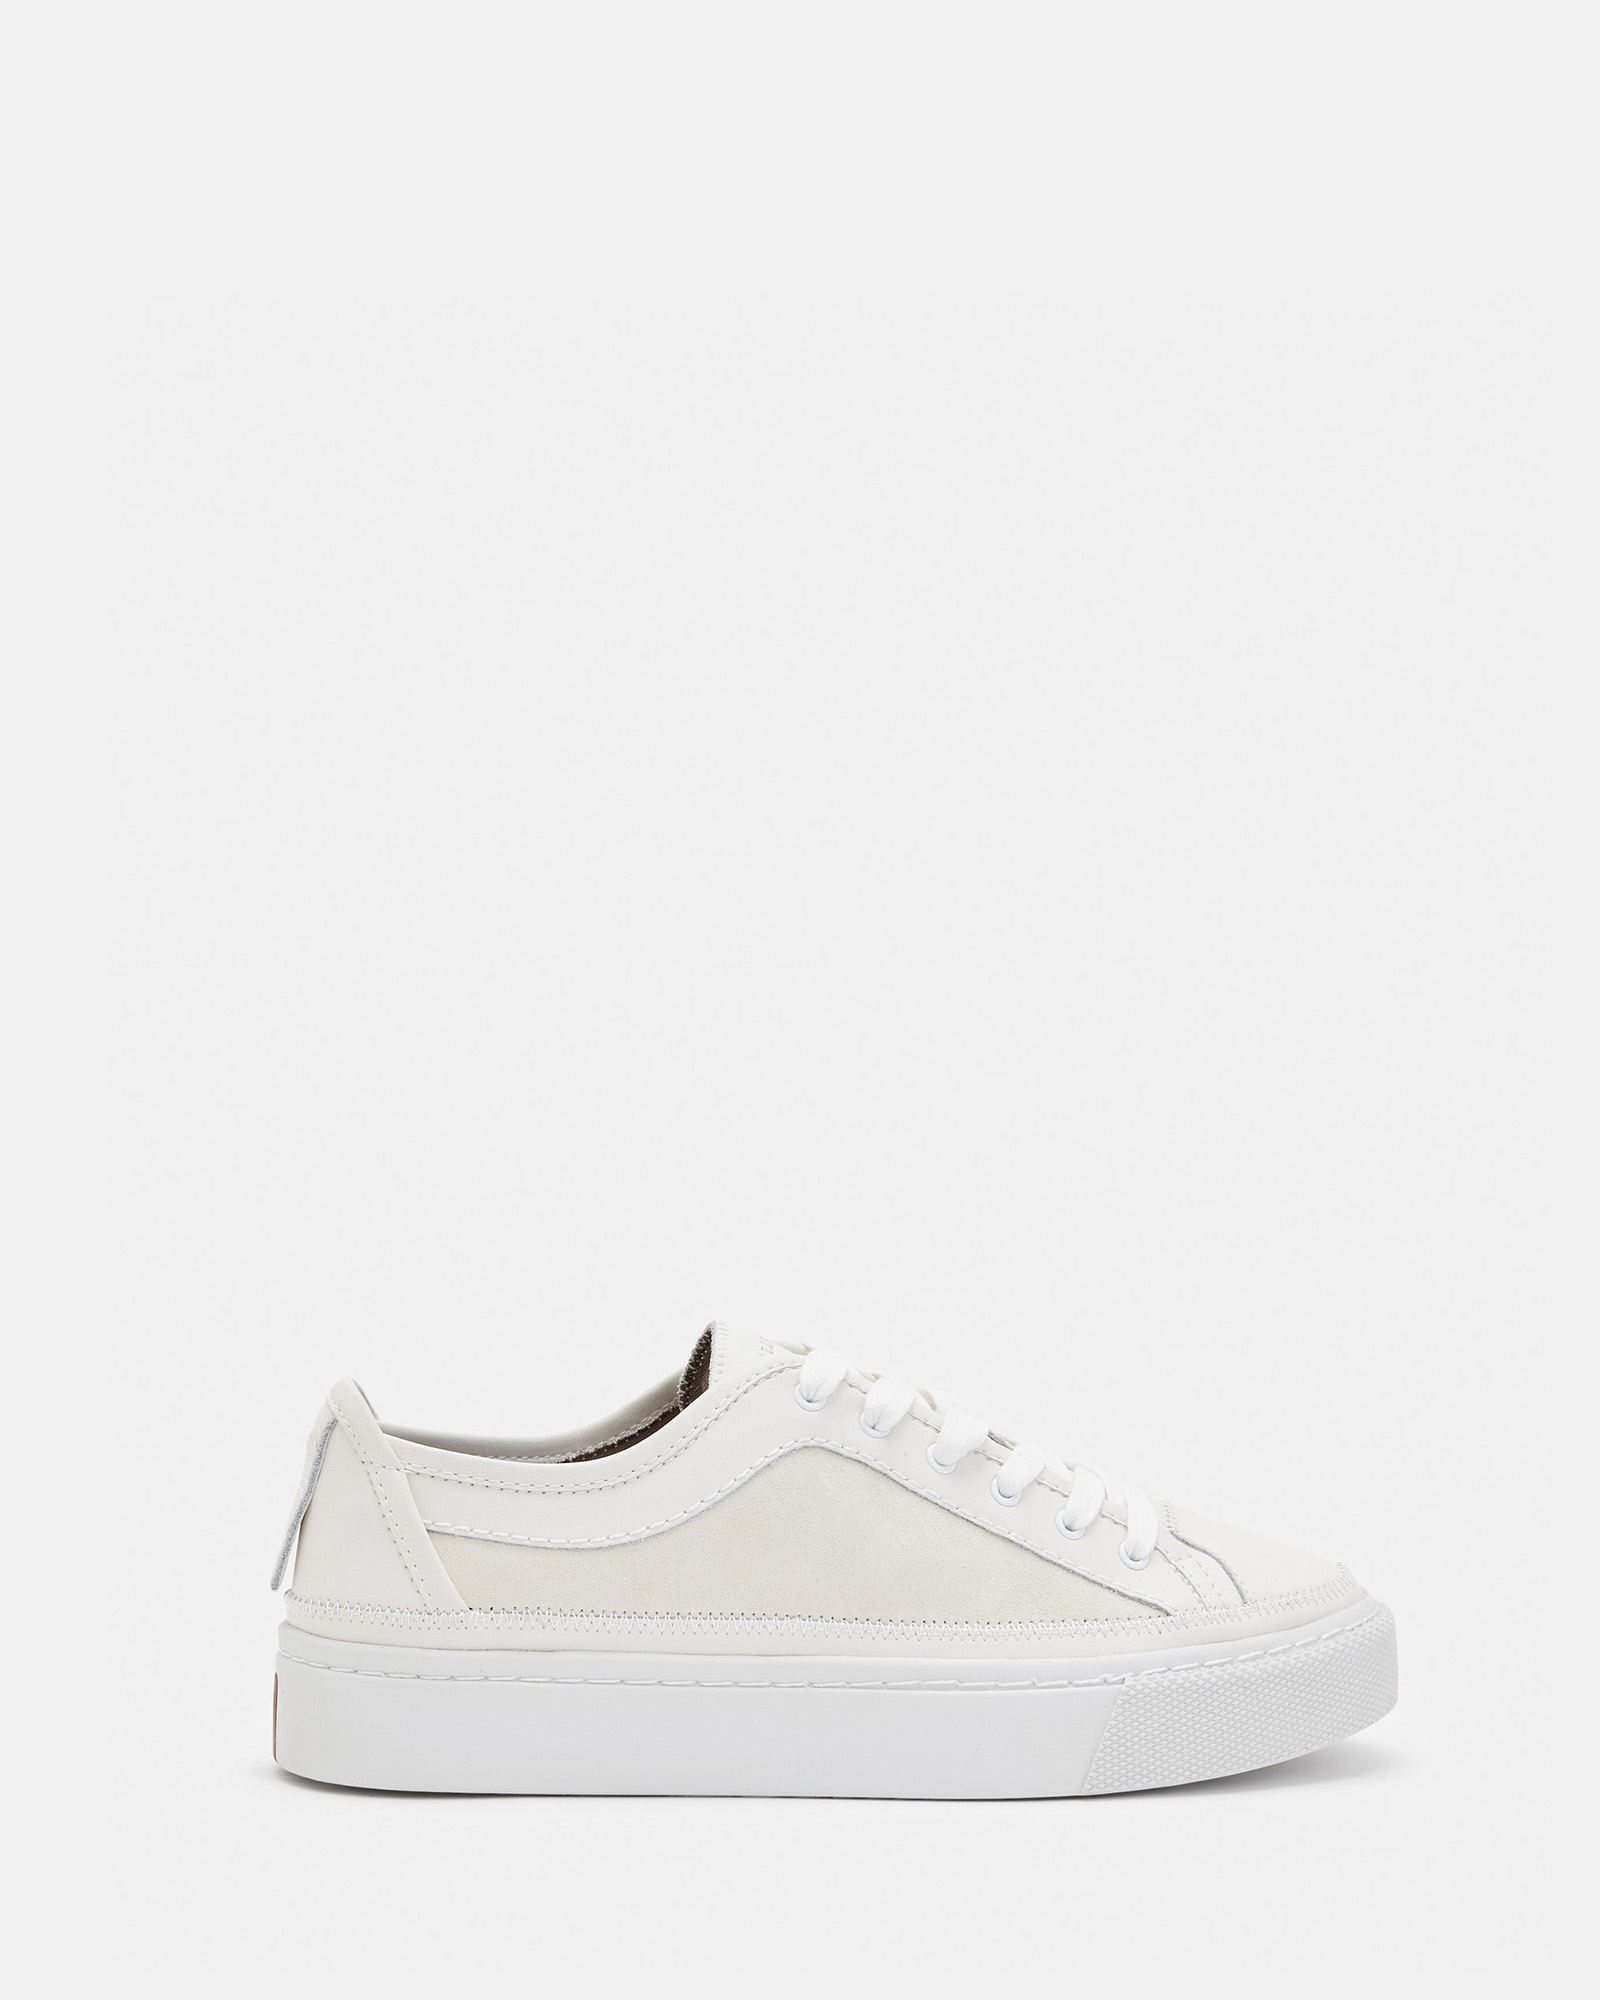 AllSaints Milla Leather Trainers